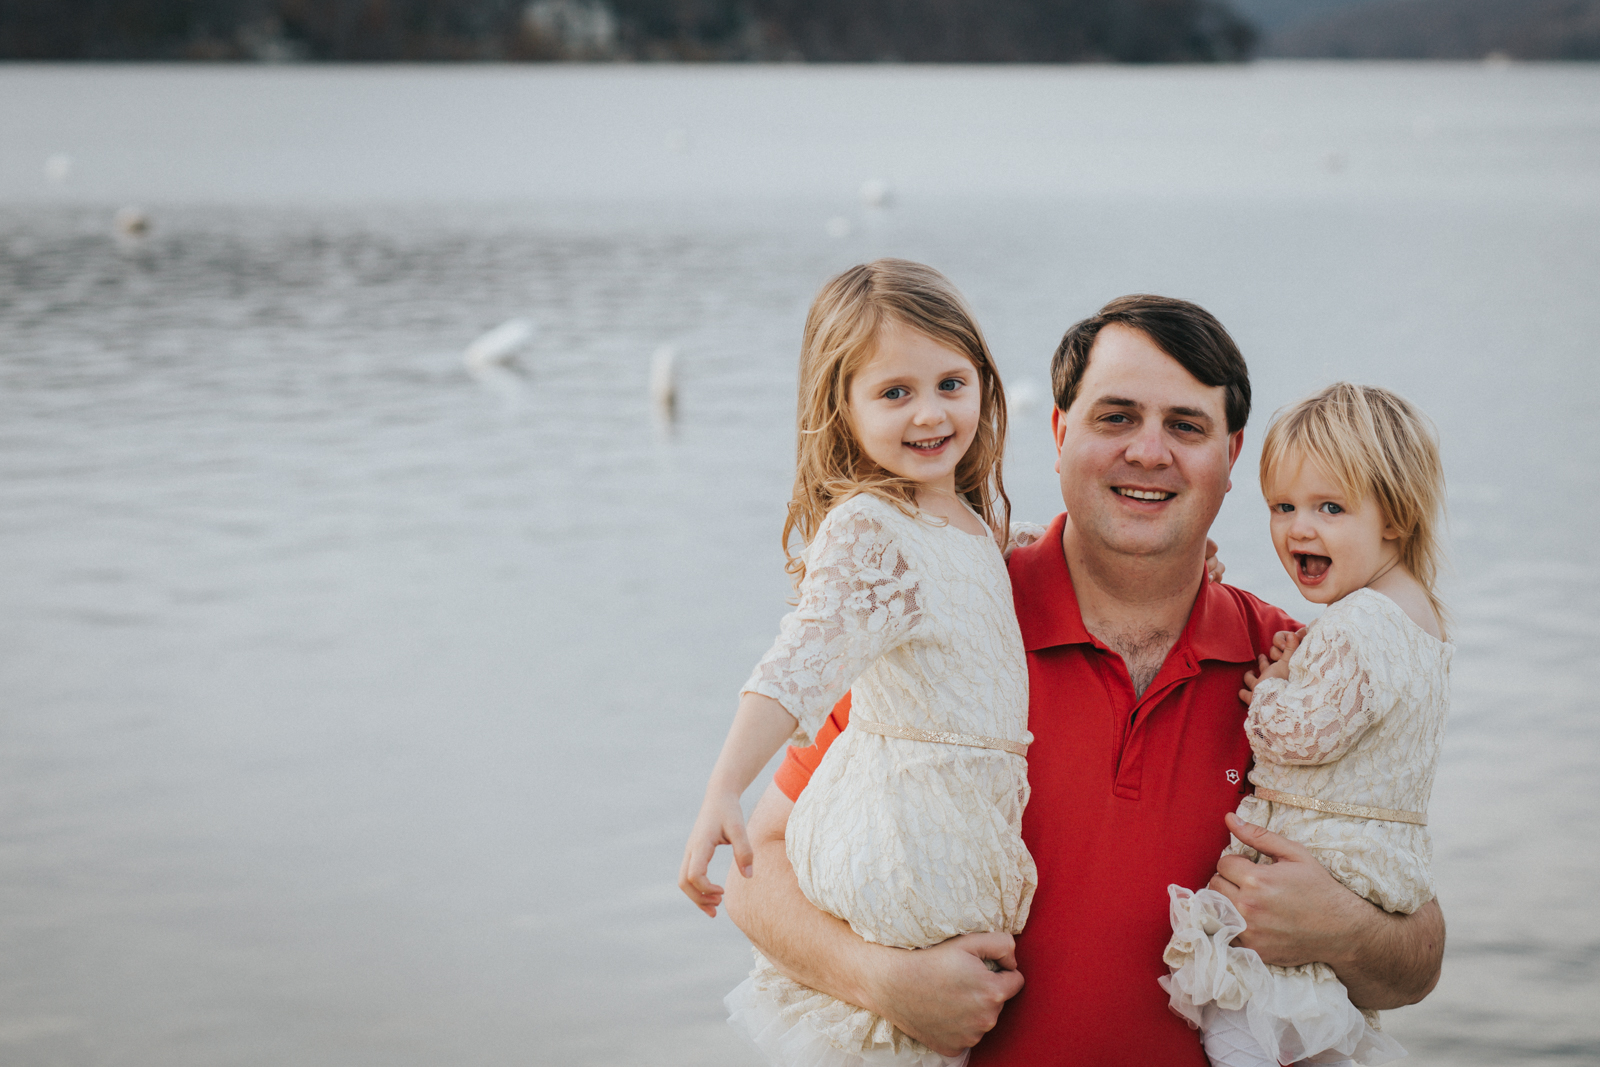 The Hill Family, Candlewood Lake - Victoria Way Photography